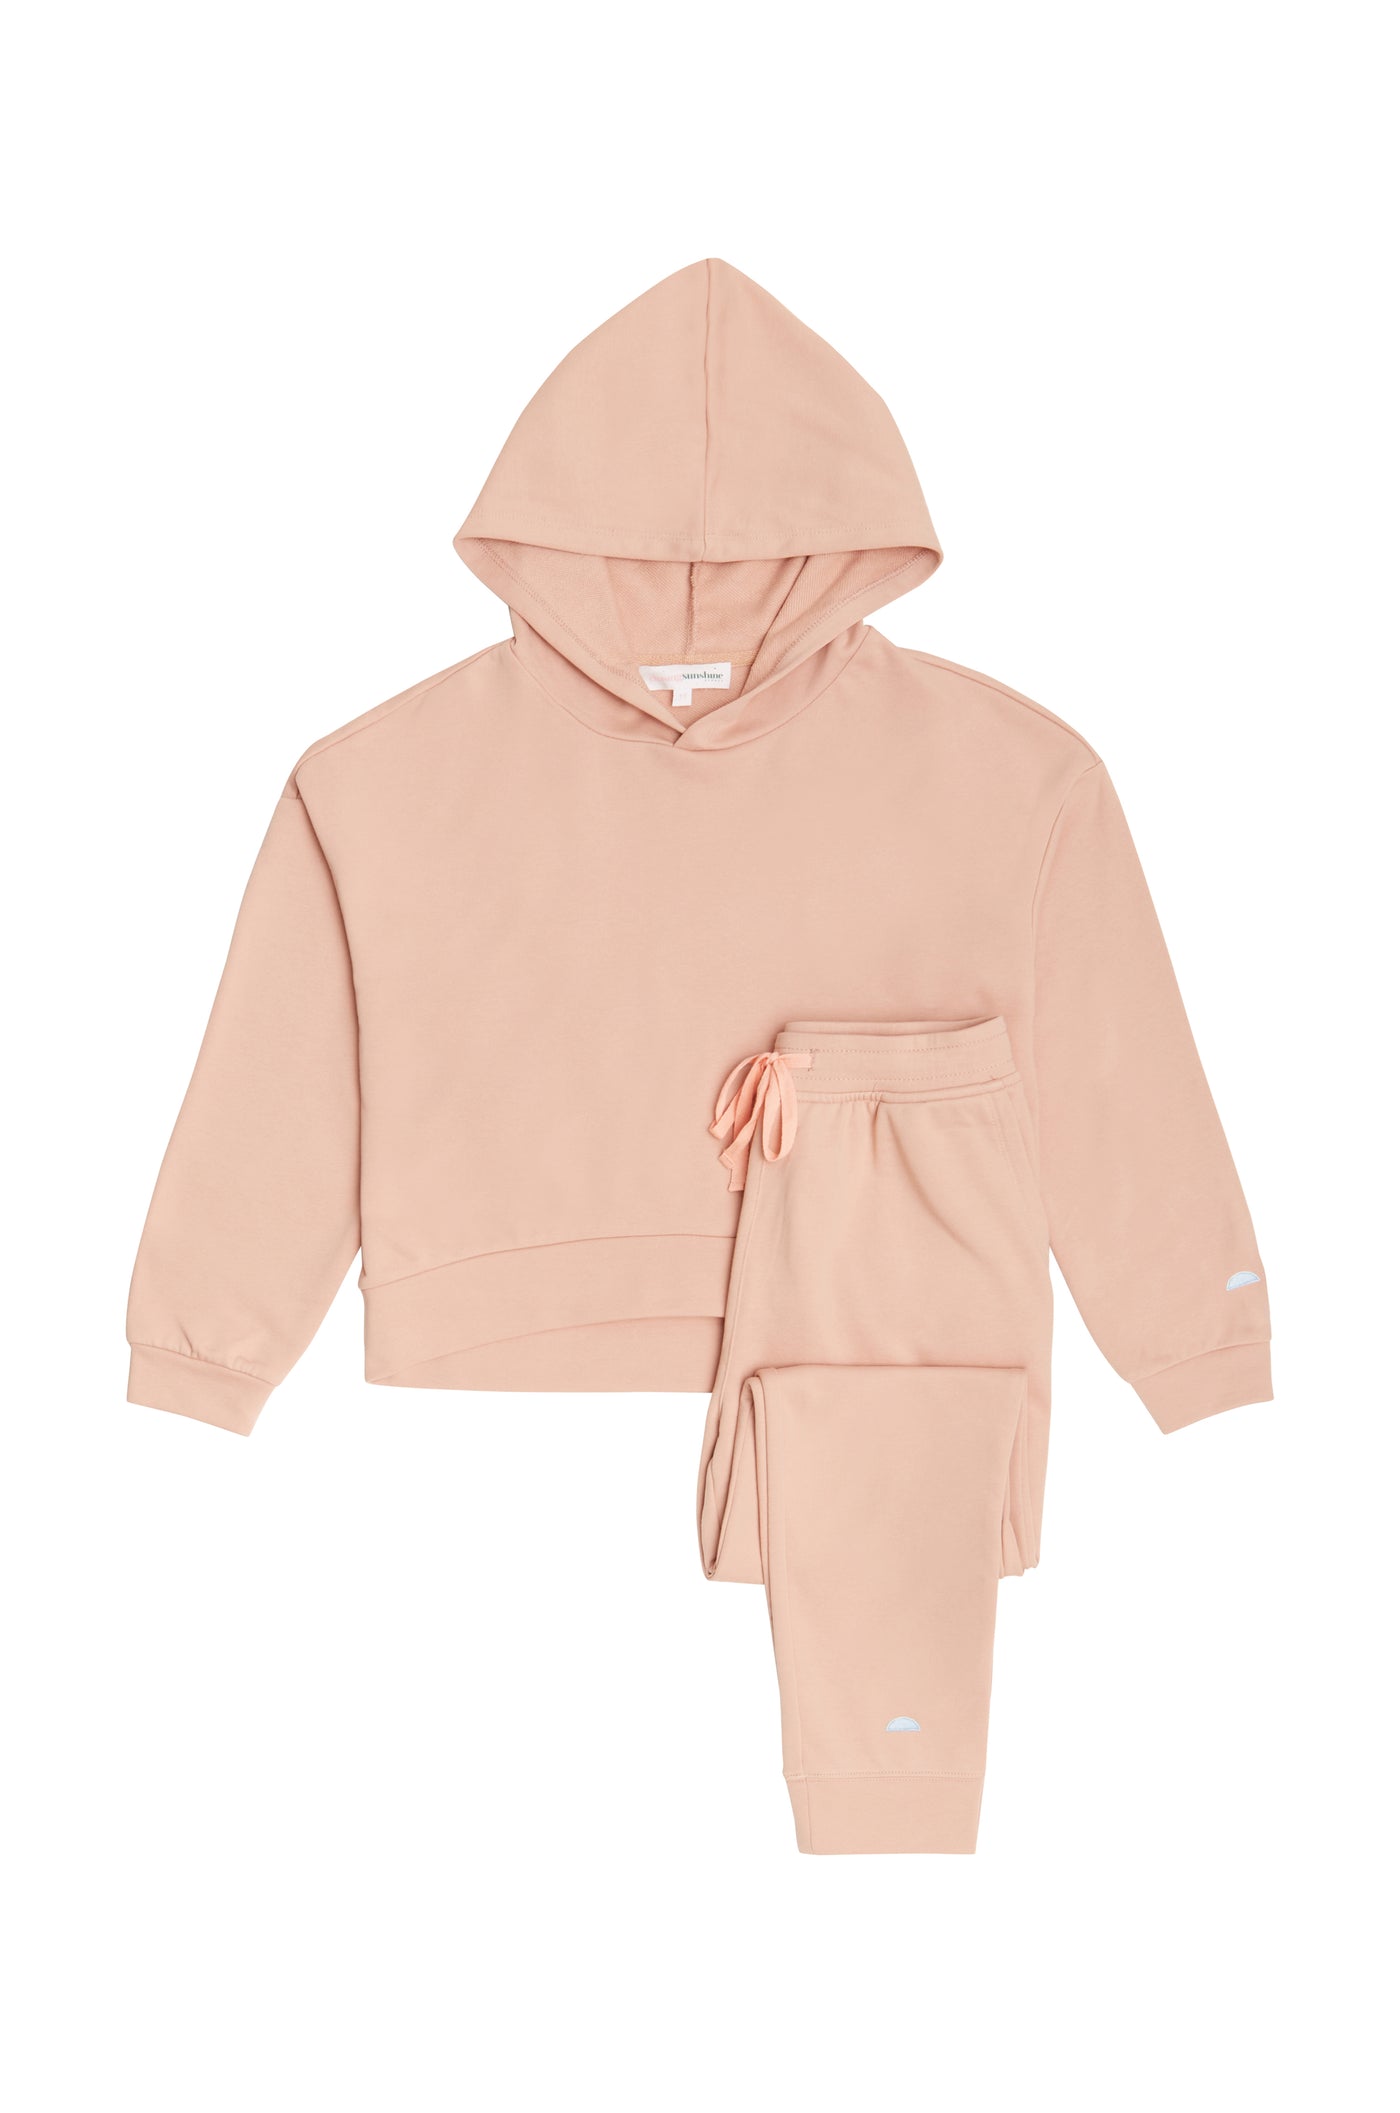 VENICE BEACH HOODIE AND SWEATPANTS IN BLUSH PINK